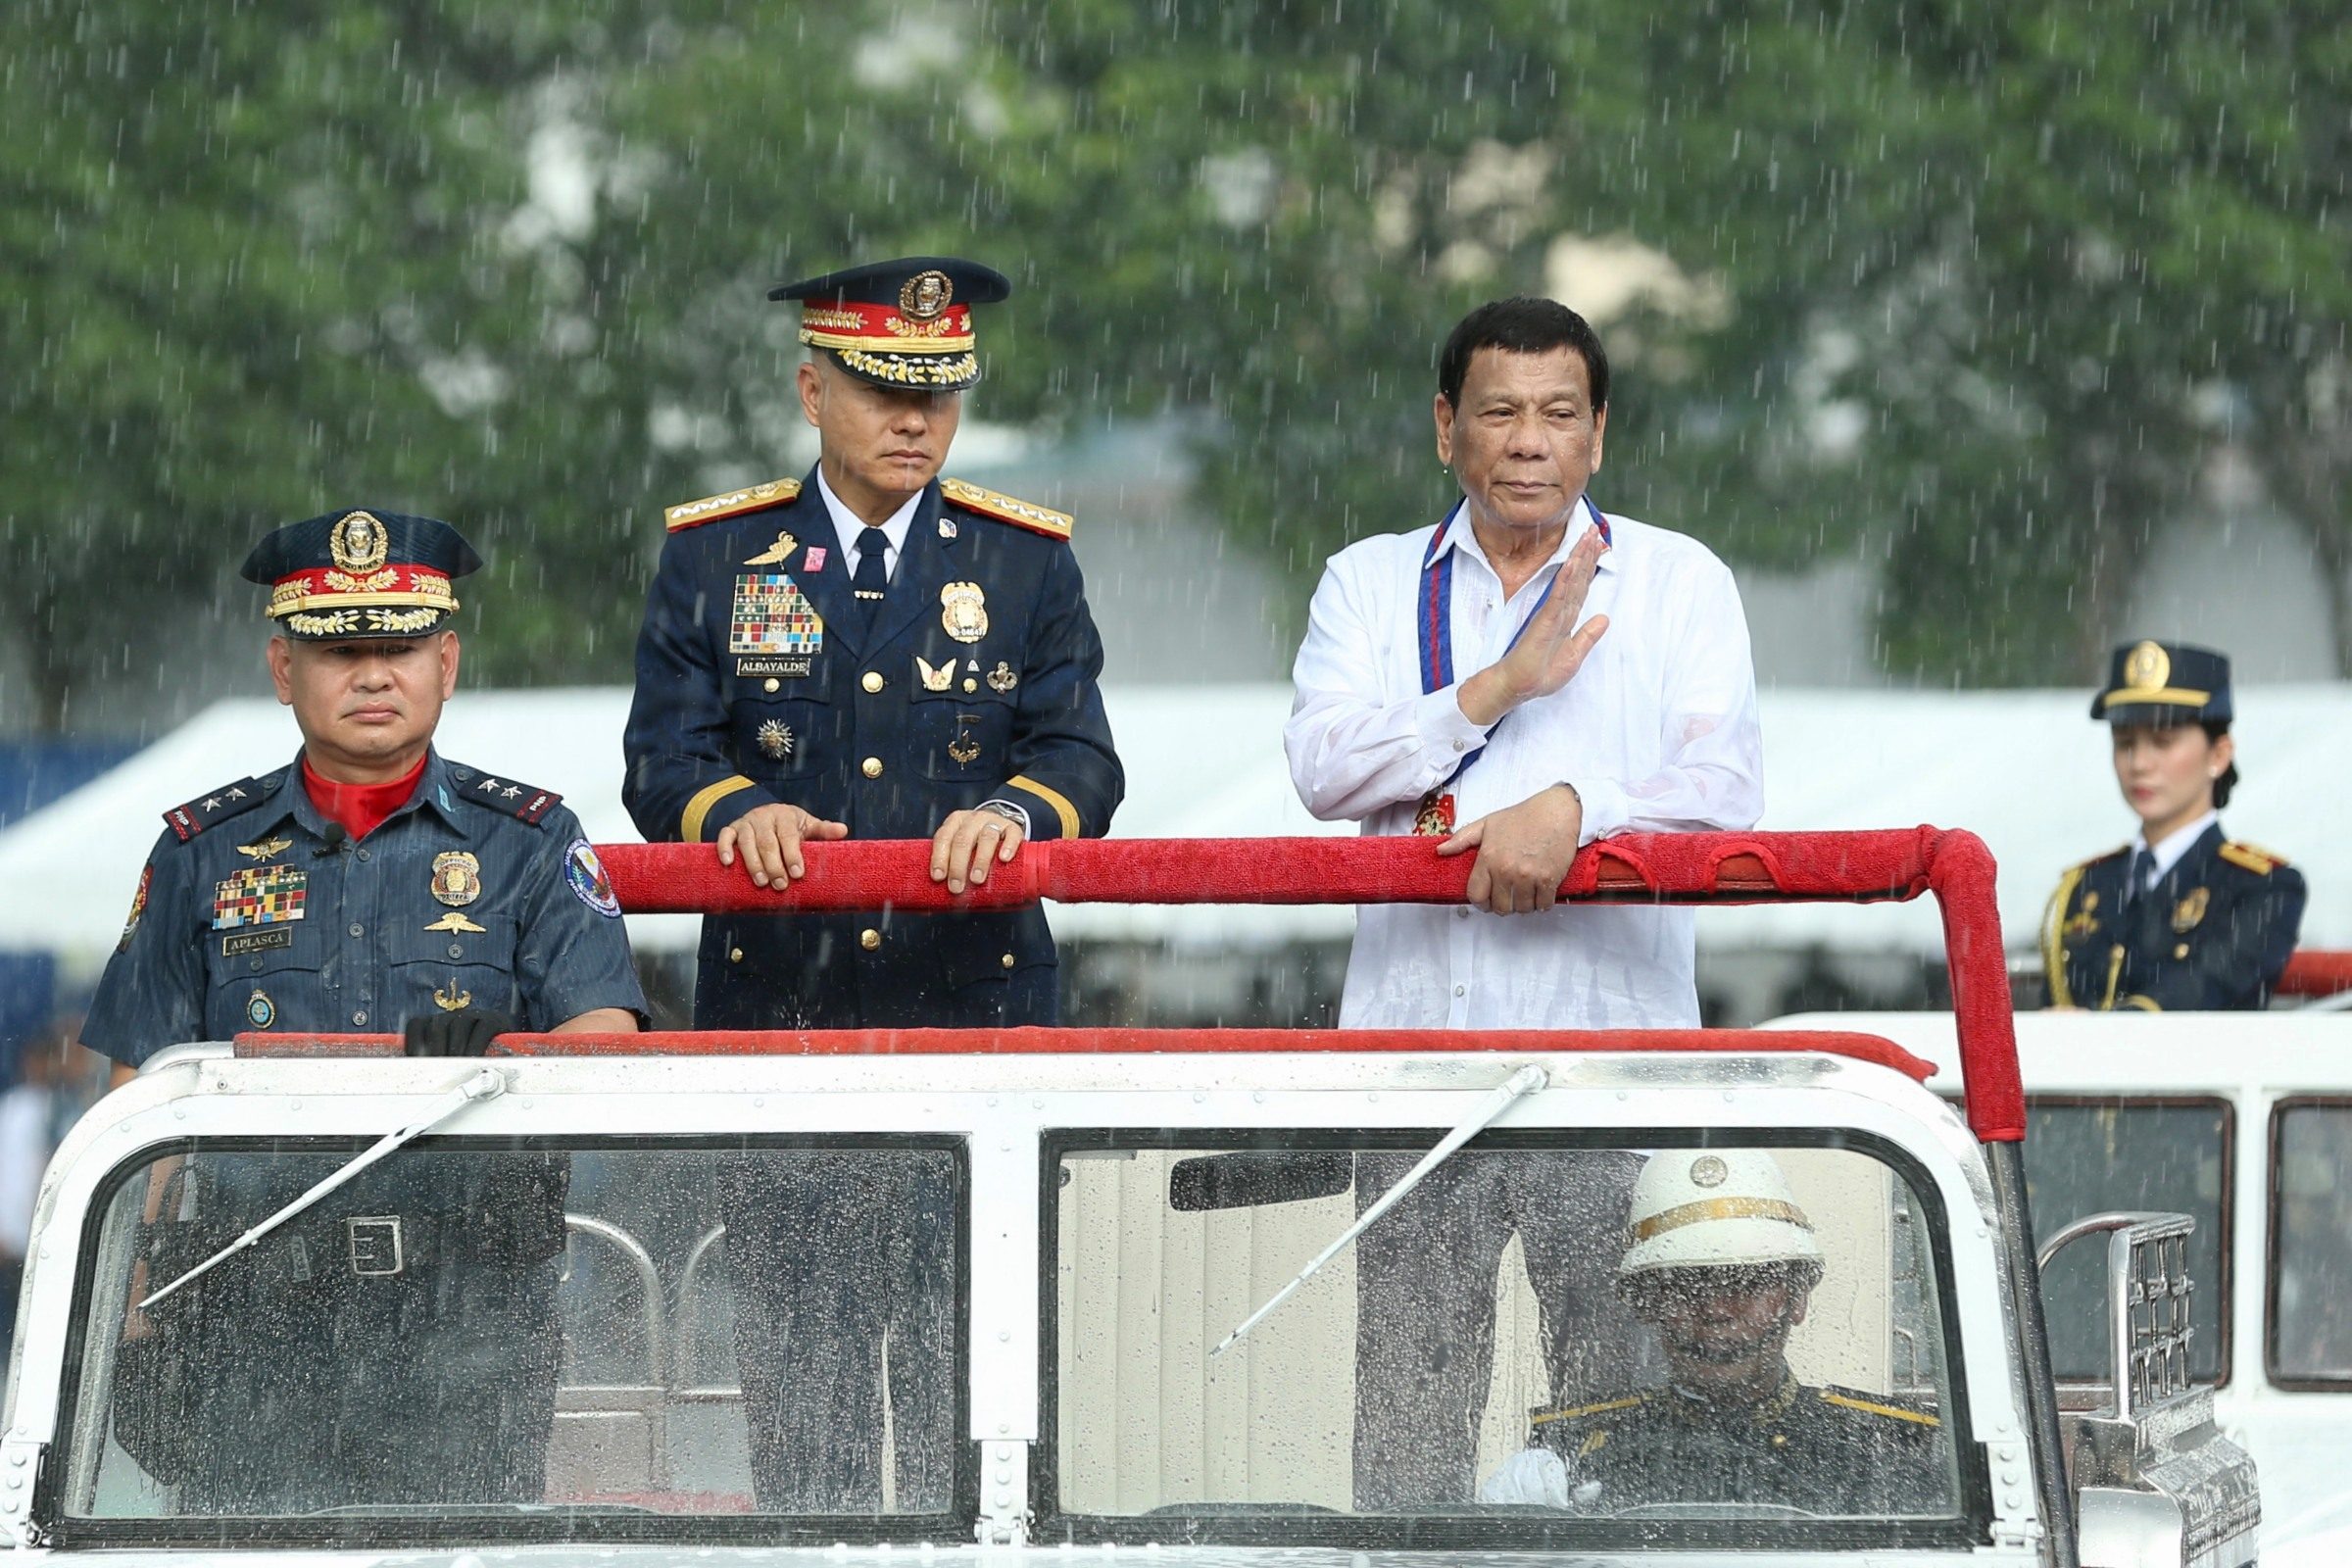 THE SHOW MUST GO ON. Inspite of the downpour, President Rodrigo Duterte leads the trooping of the line during the 117th Police Service Anniversary at  Camp Crame, Quezon City on August 8, 2018. Malacanang photo  